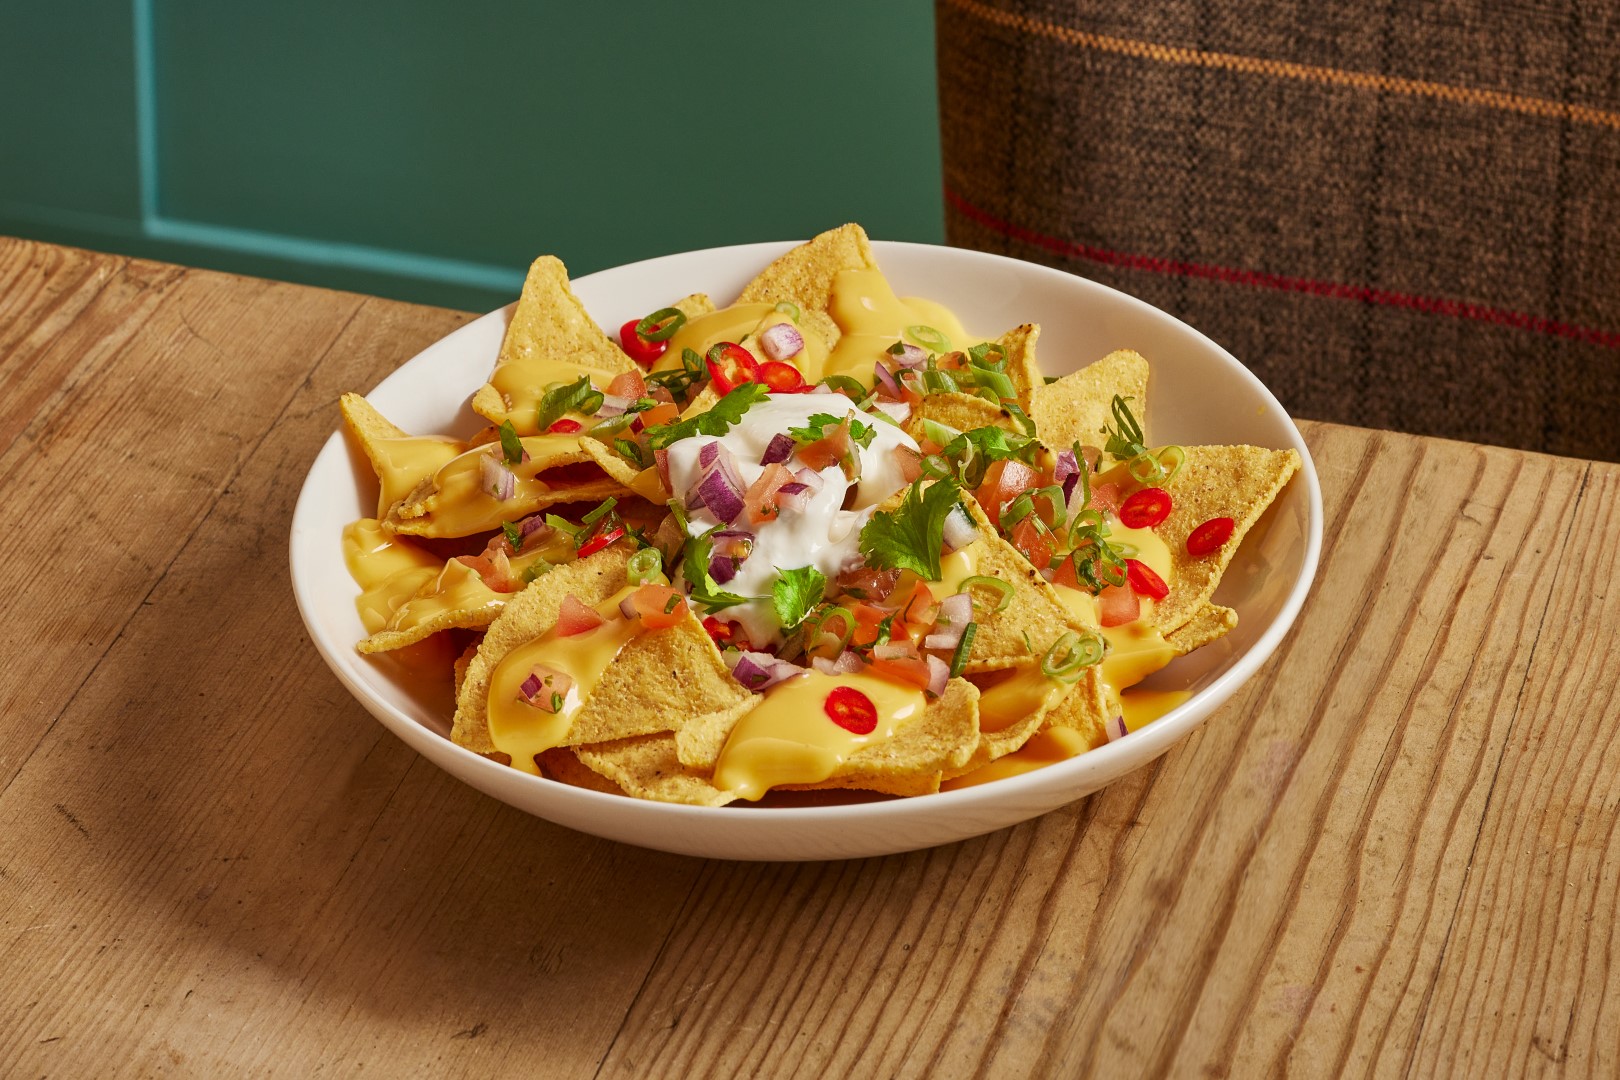 Table Table Loaded Nachos With cheese, red chillis, tomato salsa and reduced-fat soured cream